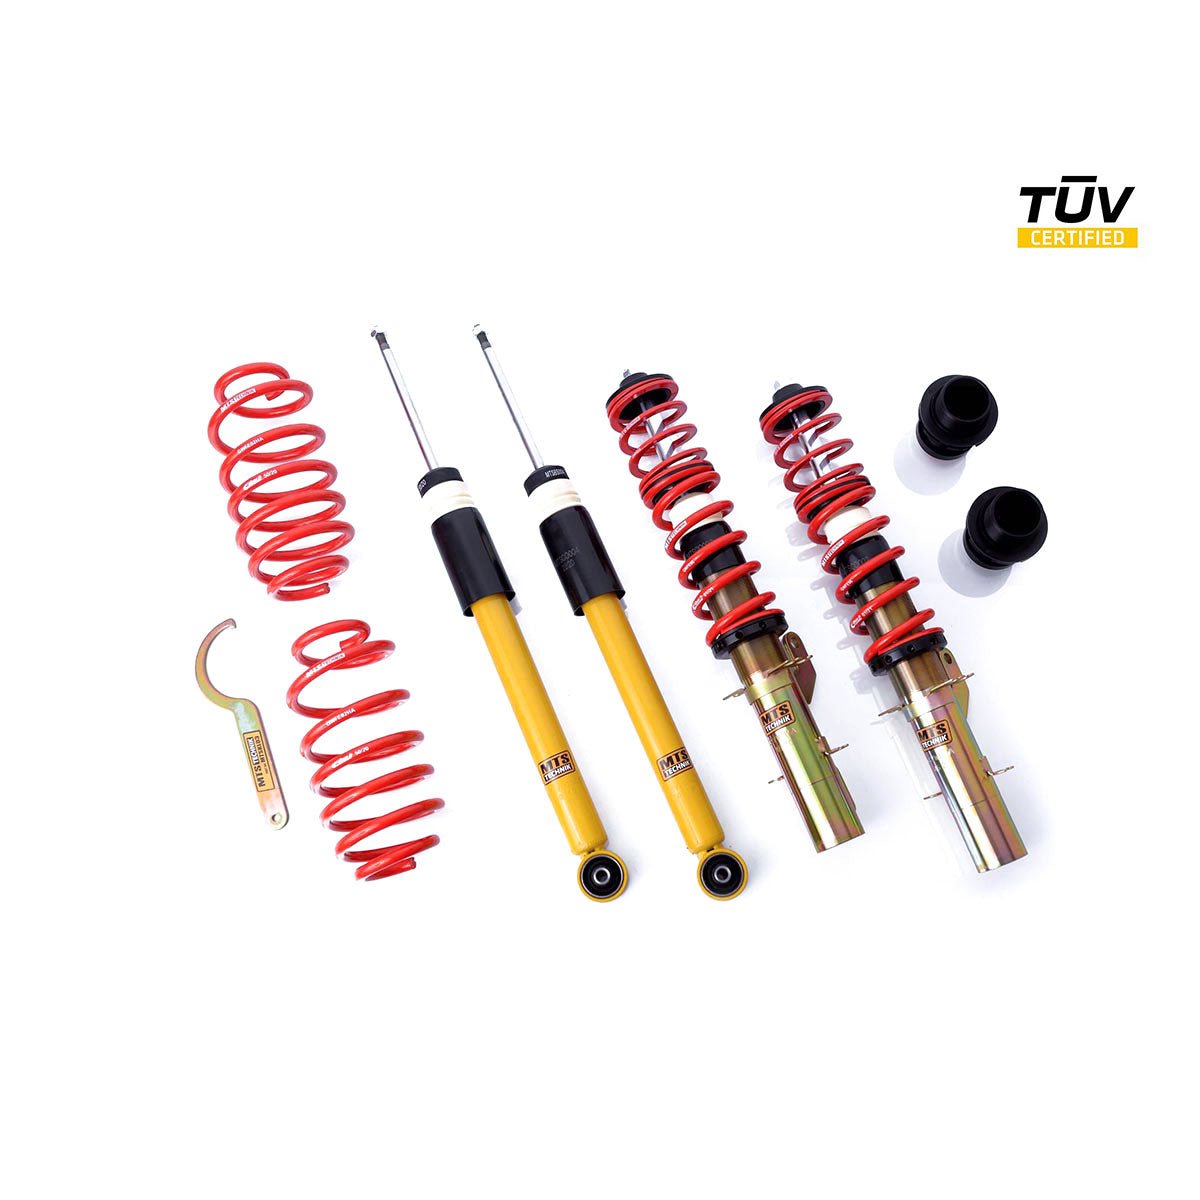 MTS TECHNIK coilover kit STREET Audi TT 8N Coupe (with TÜV) - PARTS33 GmbH